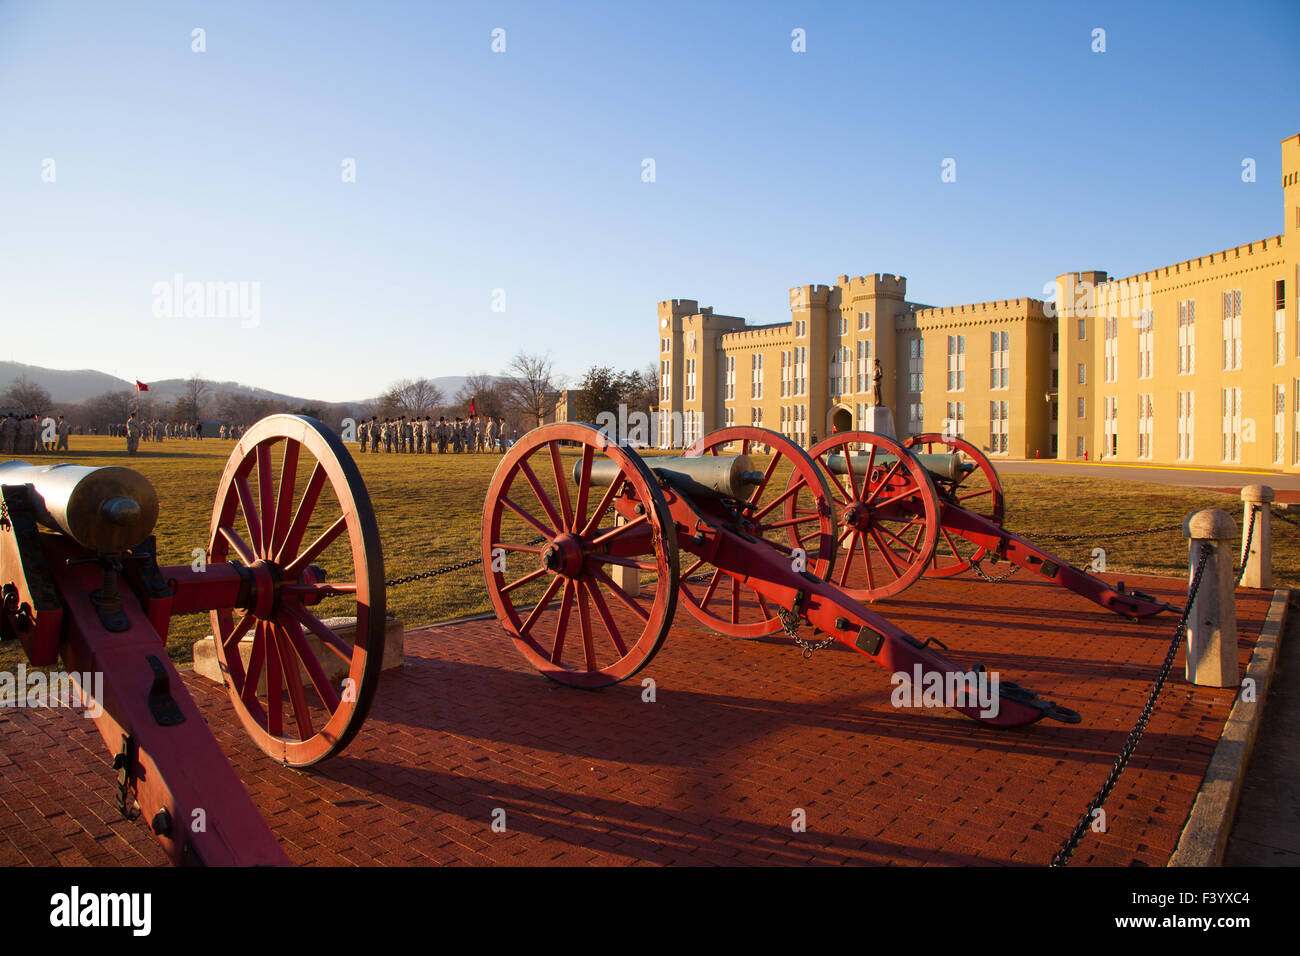 Cannons and students at Virginia Military Institute Stock Photo